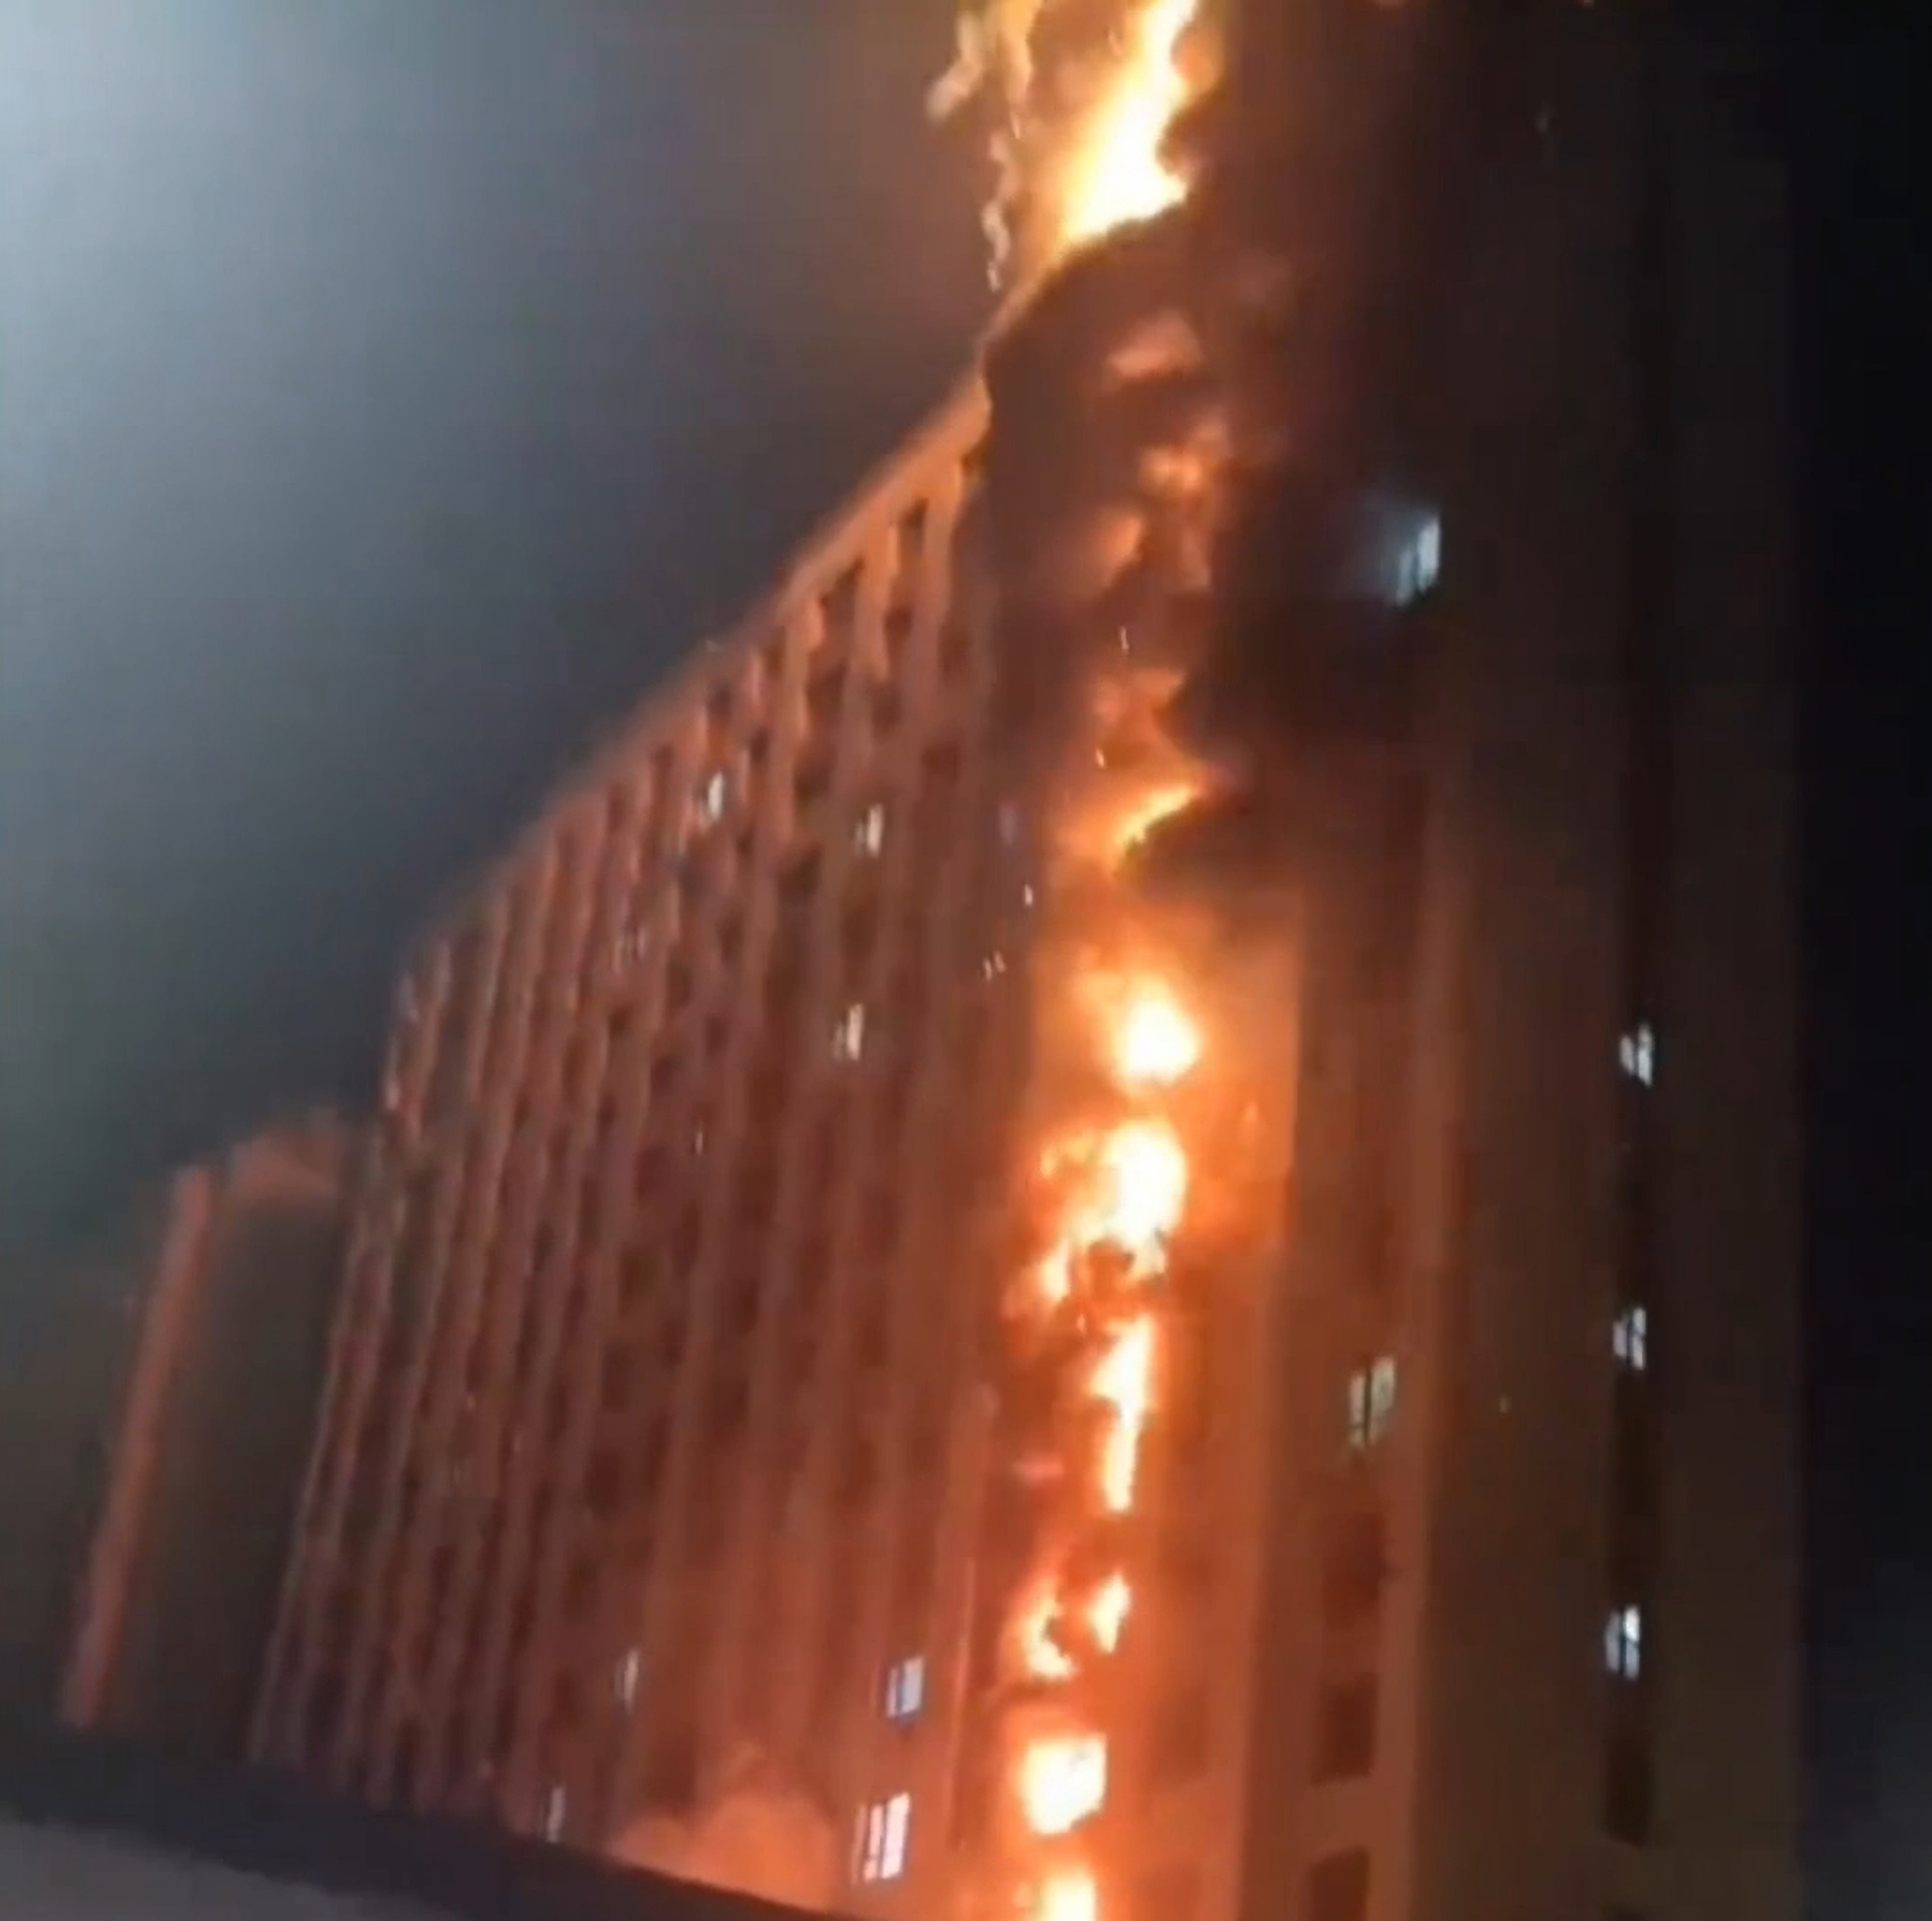 Read more about the article Building Gets Engulfed In Massive Fire From Ground Floor To Top As Frightened Bystanders Watch